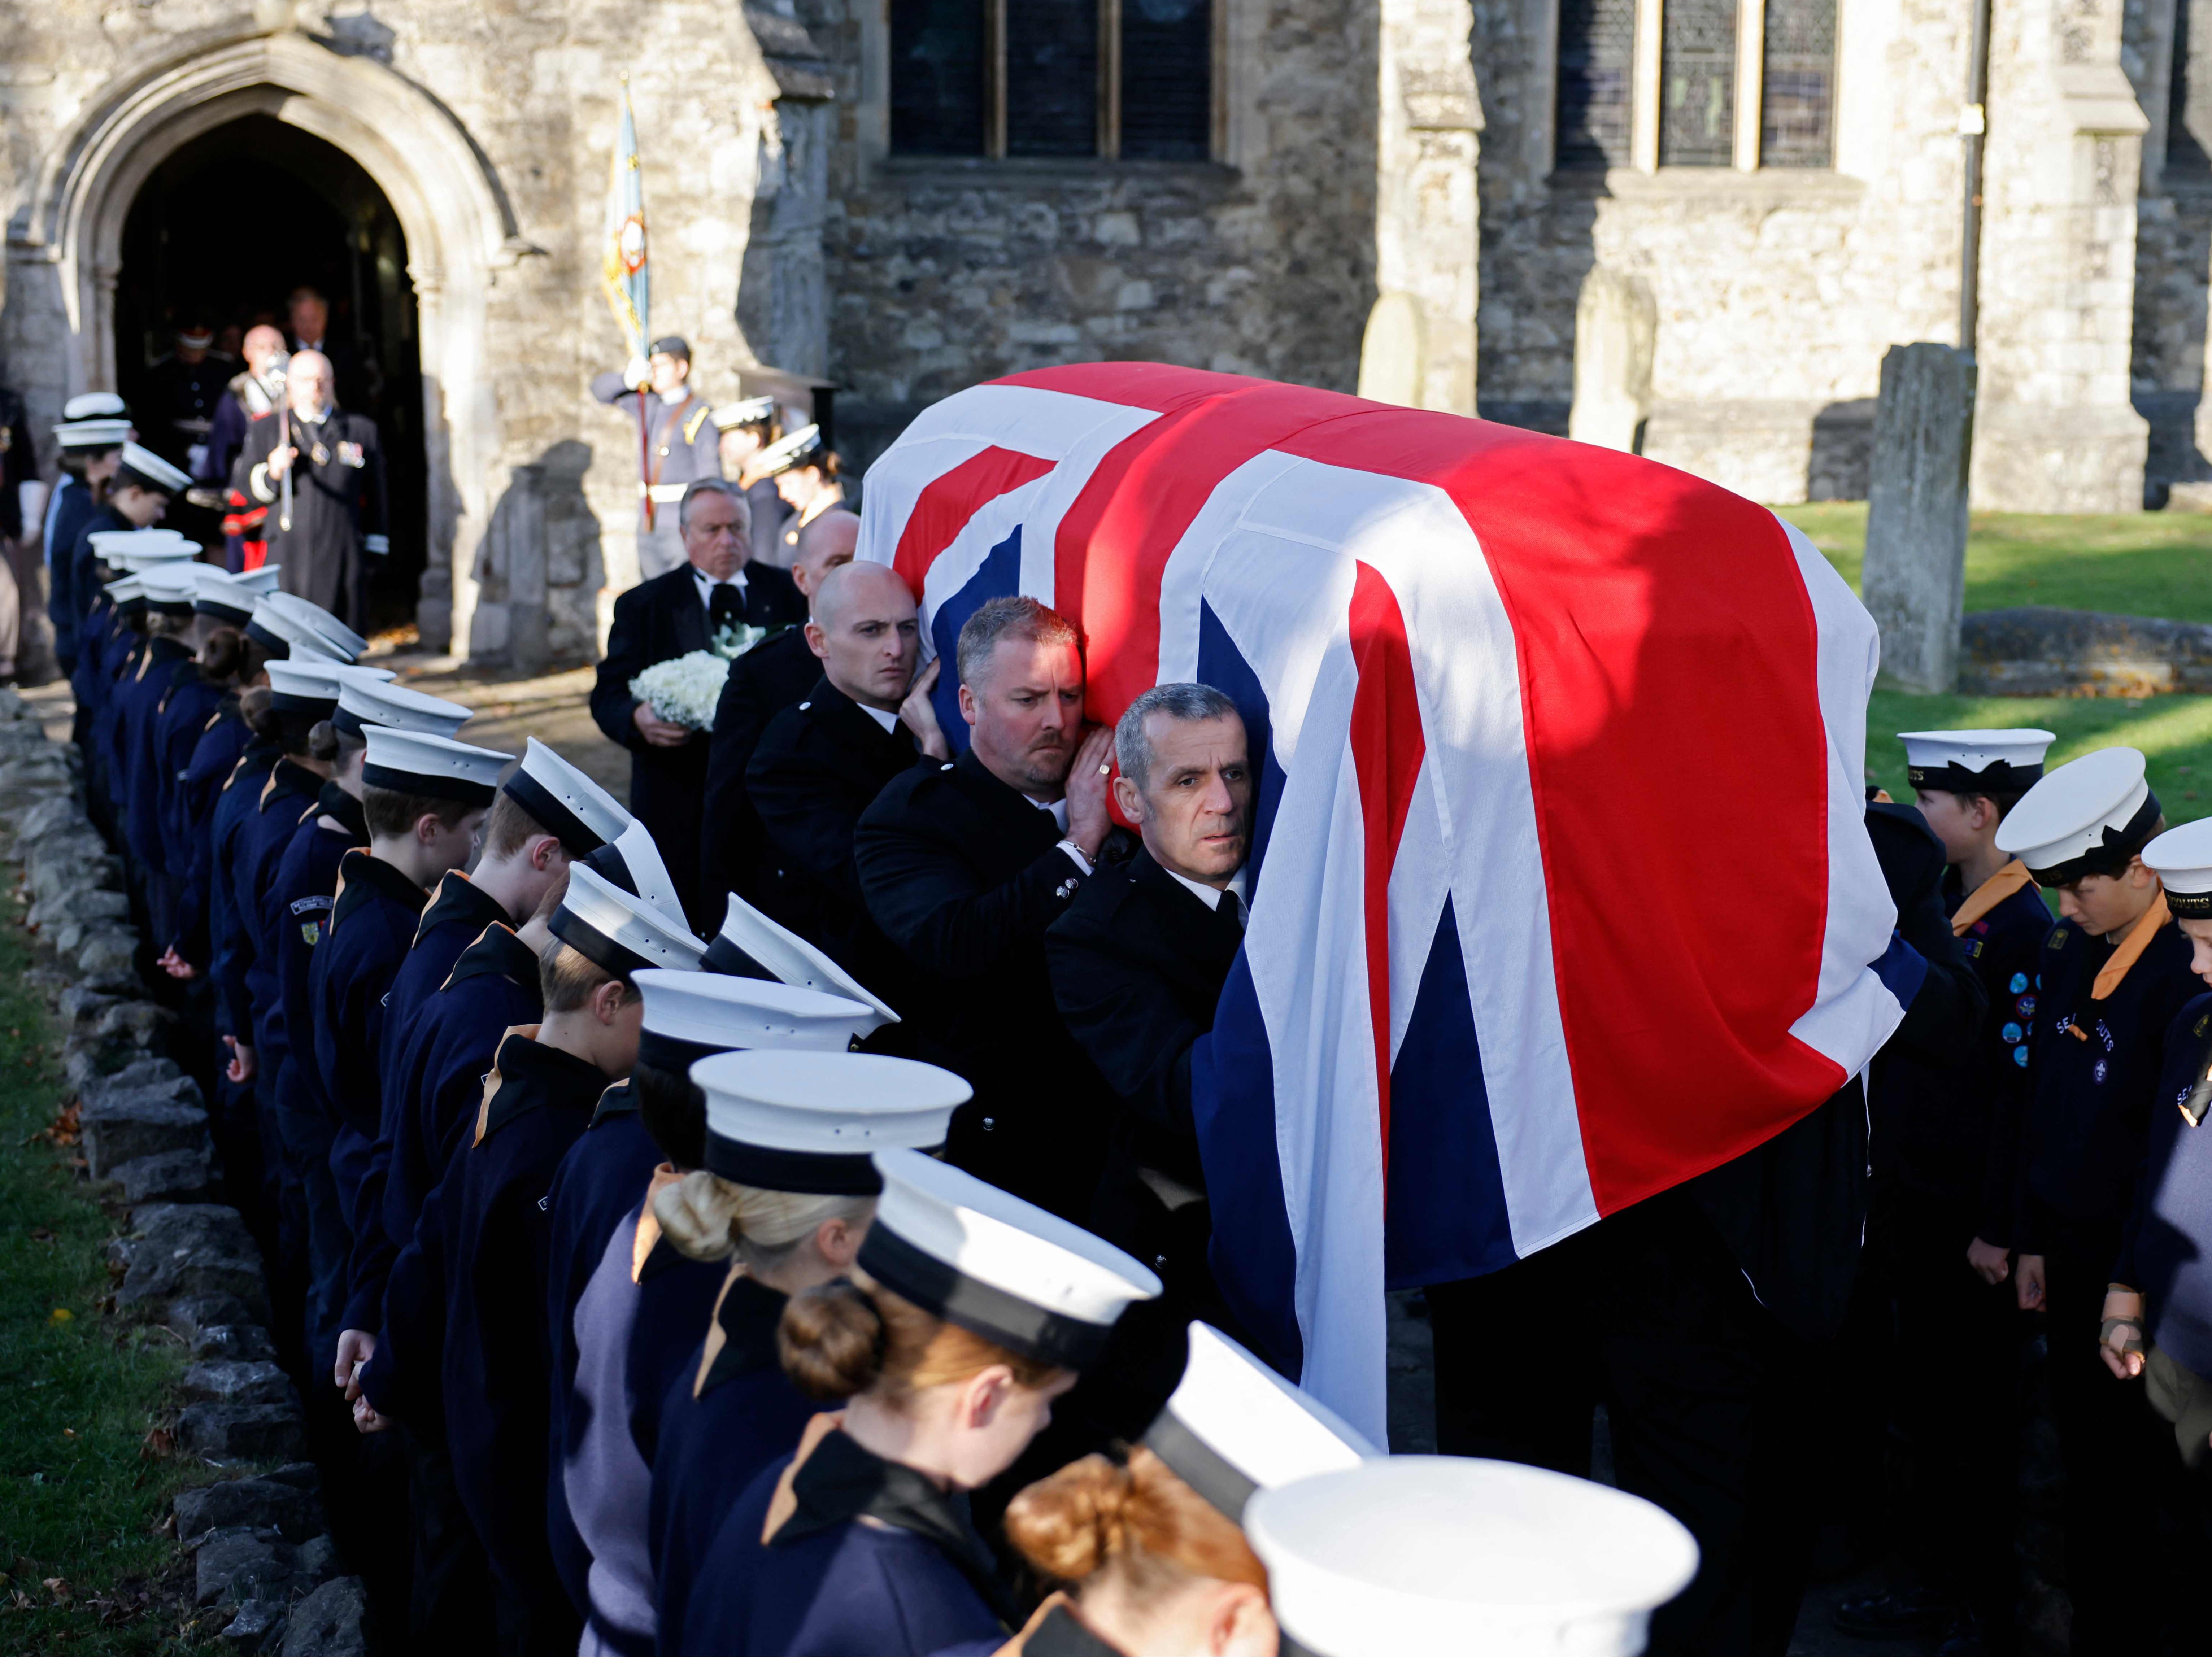 A funeral service held for Southend MP Sir David Amess in Essex